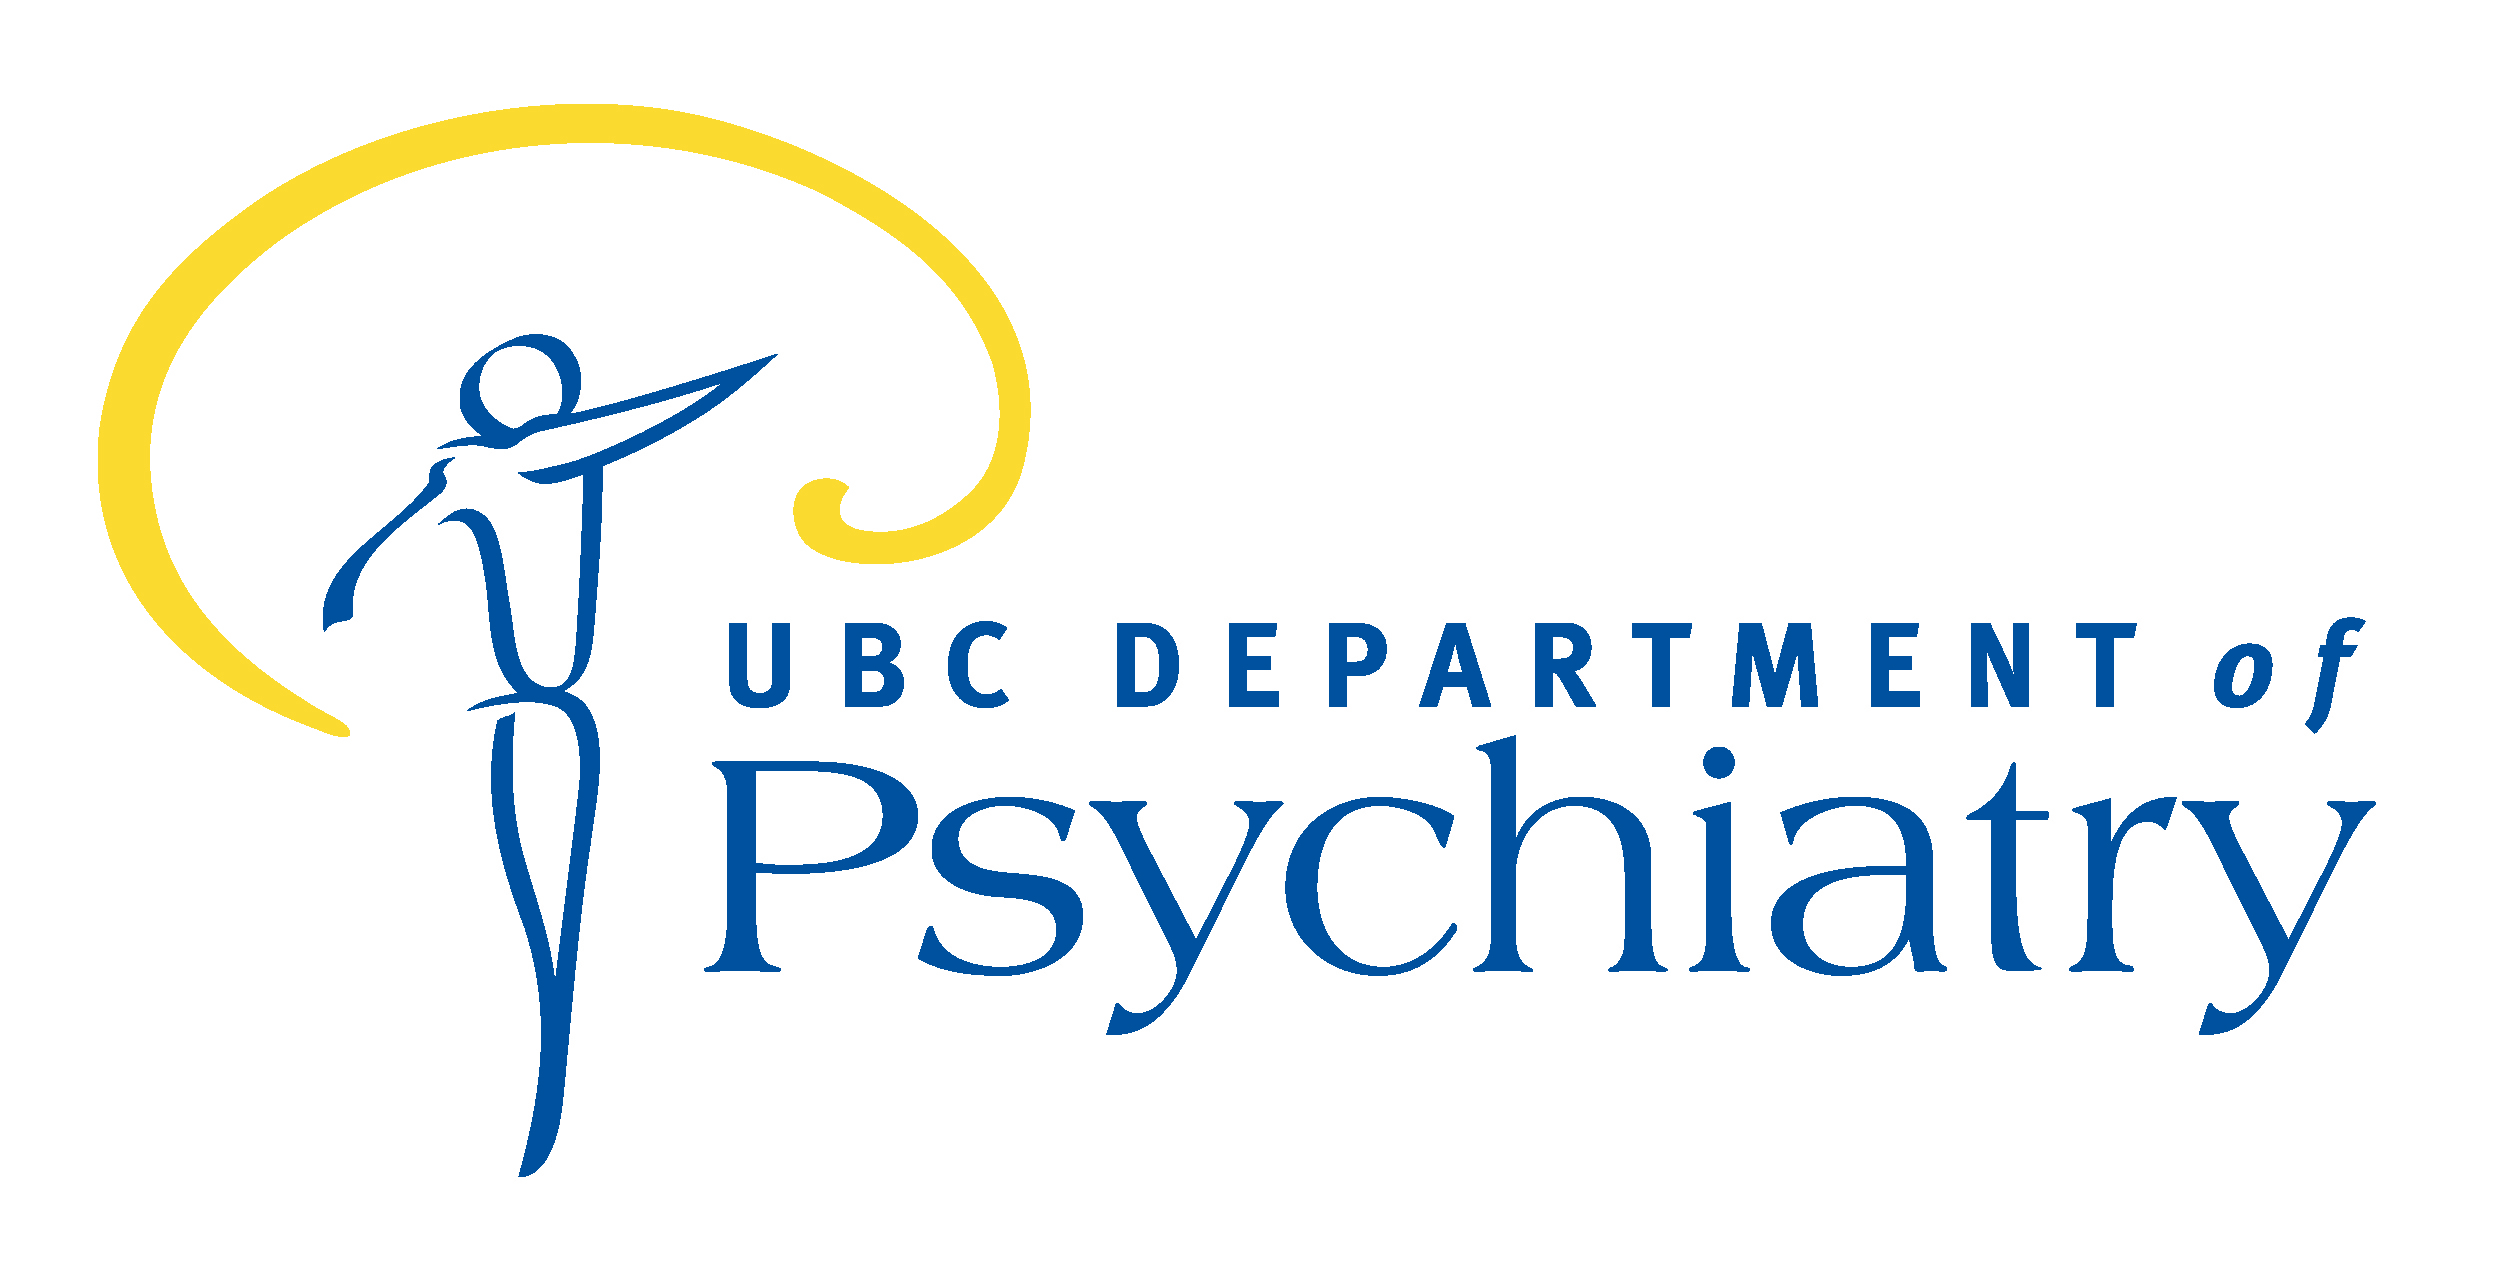 Psychiatry Logo - Working with Depression | Clinical research on workplace depression